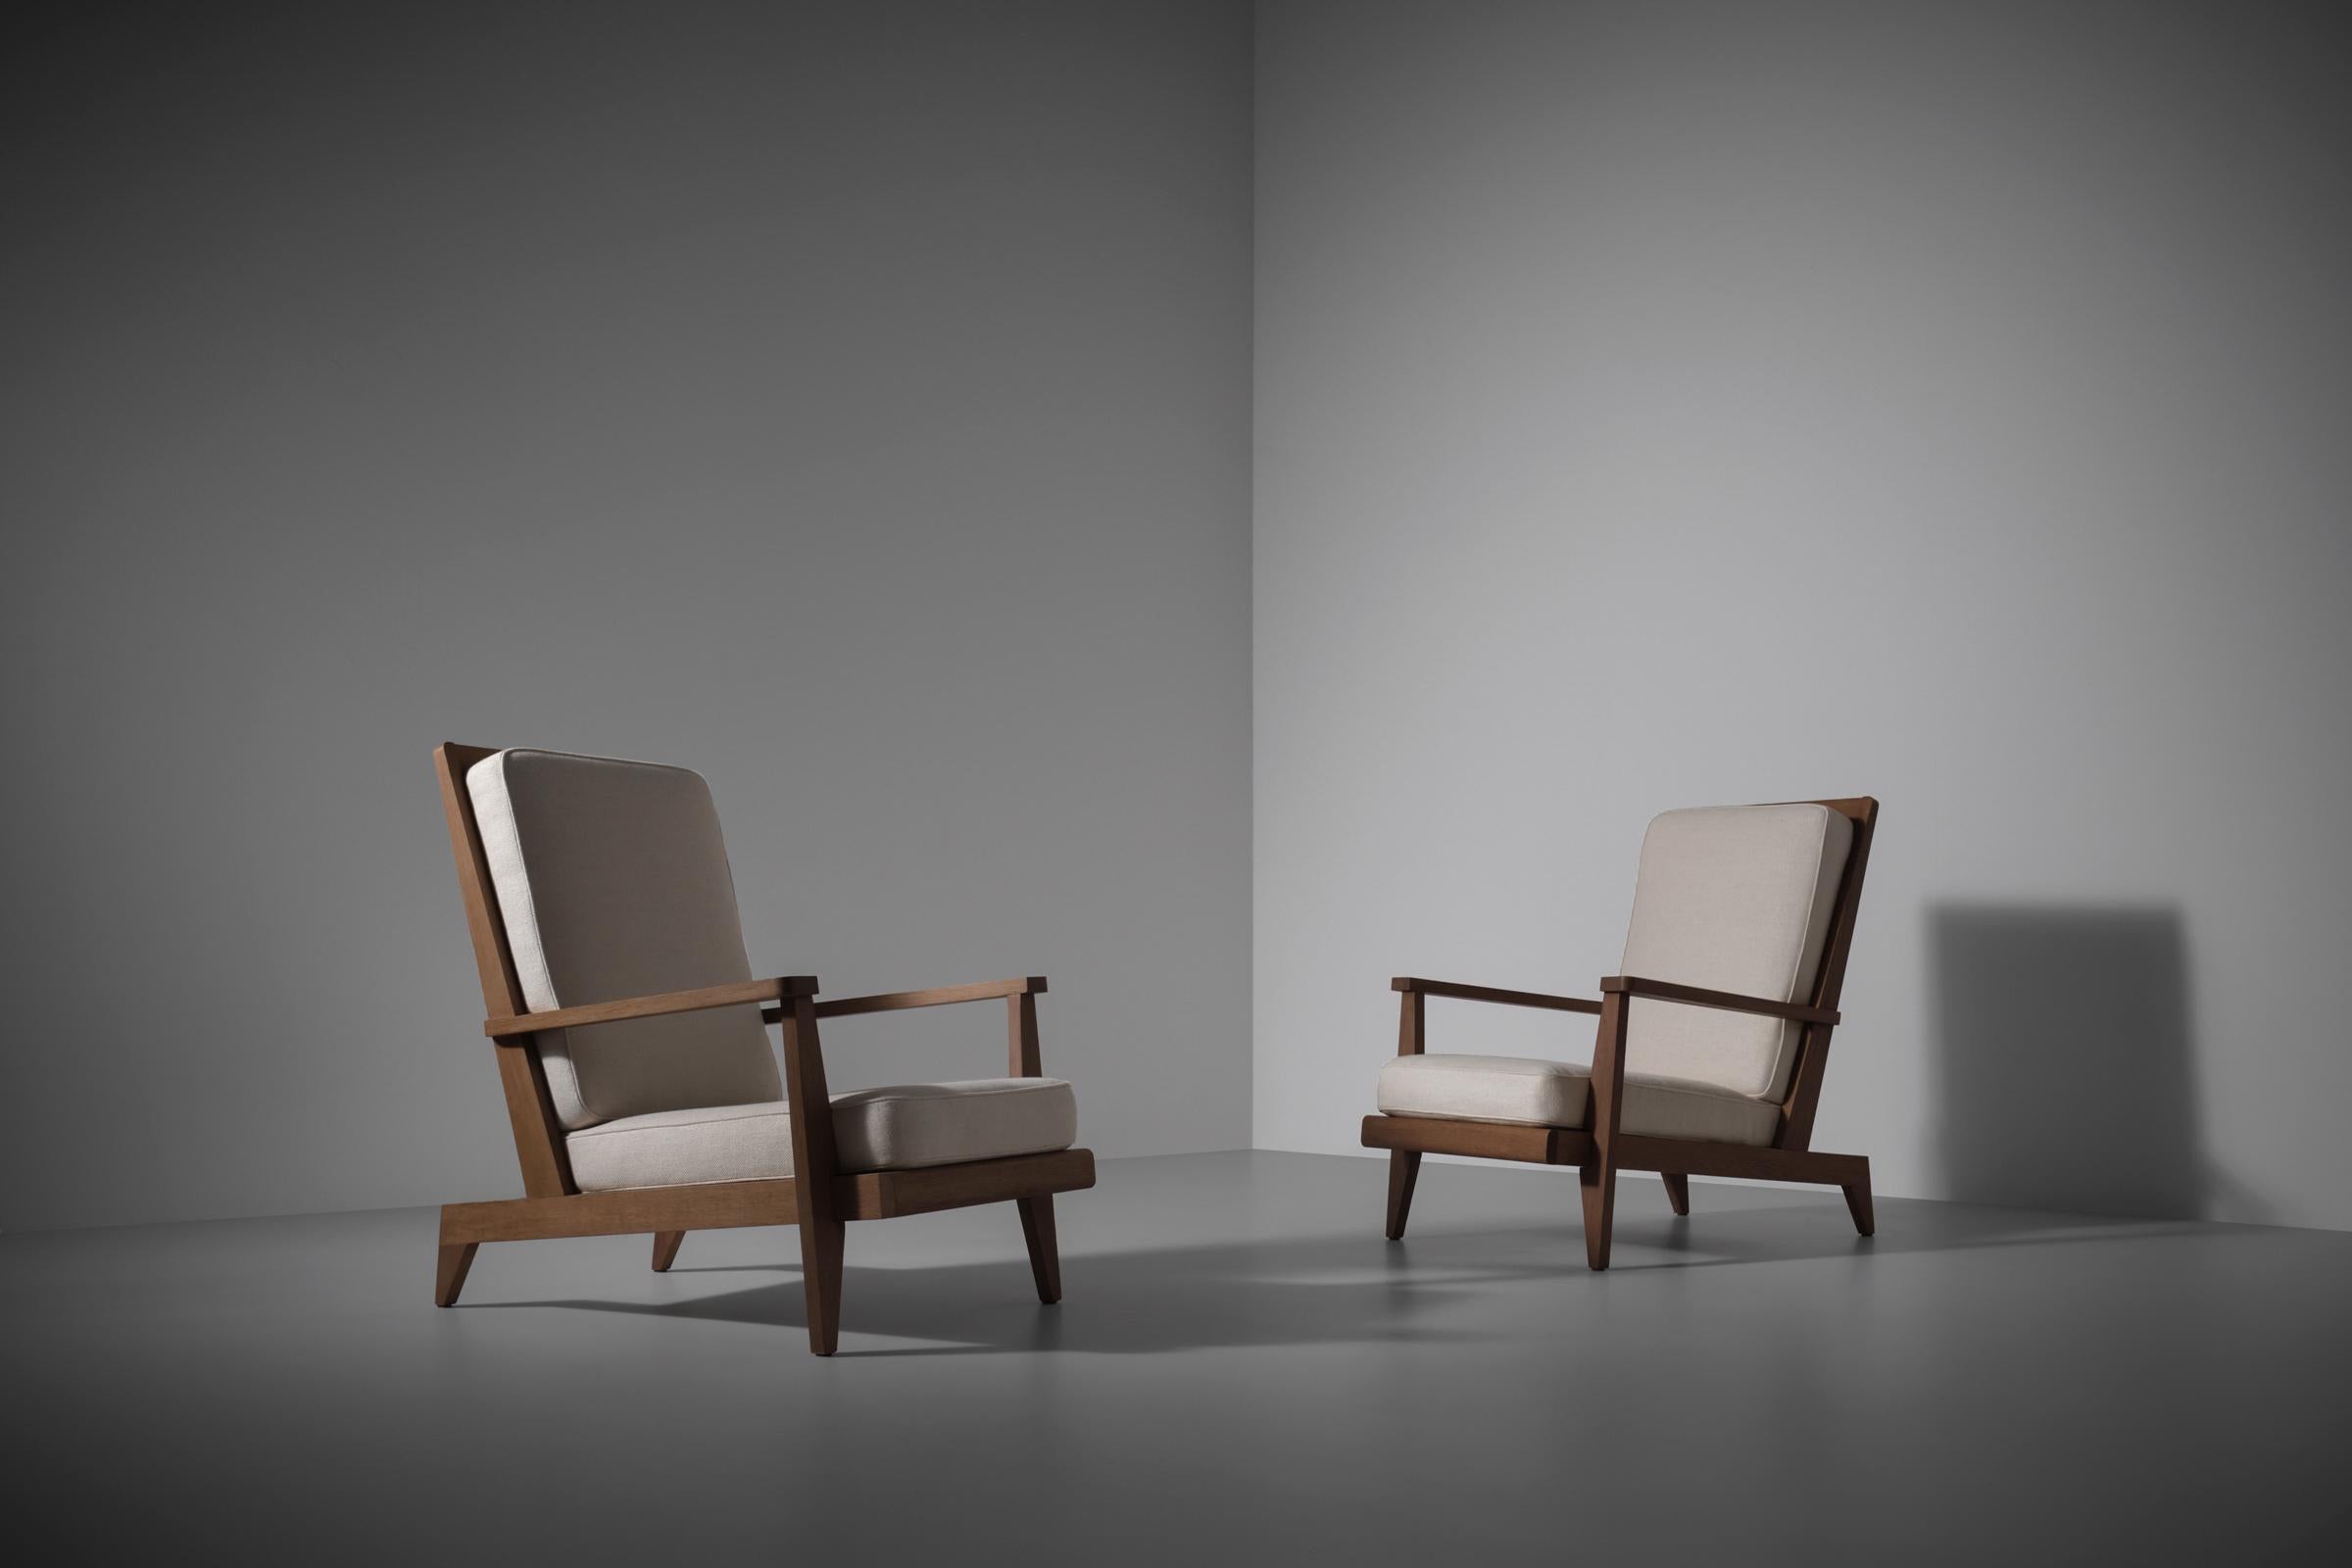 Rare pair of lounge chairs by René Gabriel (1890 - 1950). This model was designed in 1946 and was presented at the the ’Salon des artistes décorateurs' in 1953. Literature: René Gabriel by Pierre Gencey page 286.
Gabriel was president of the Société